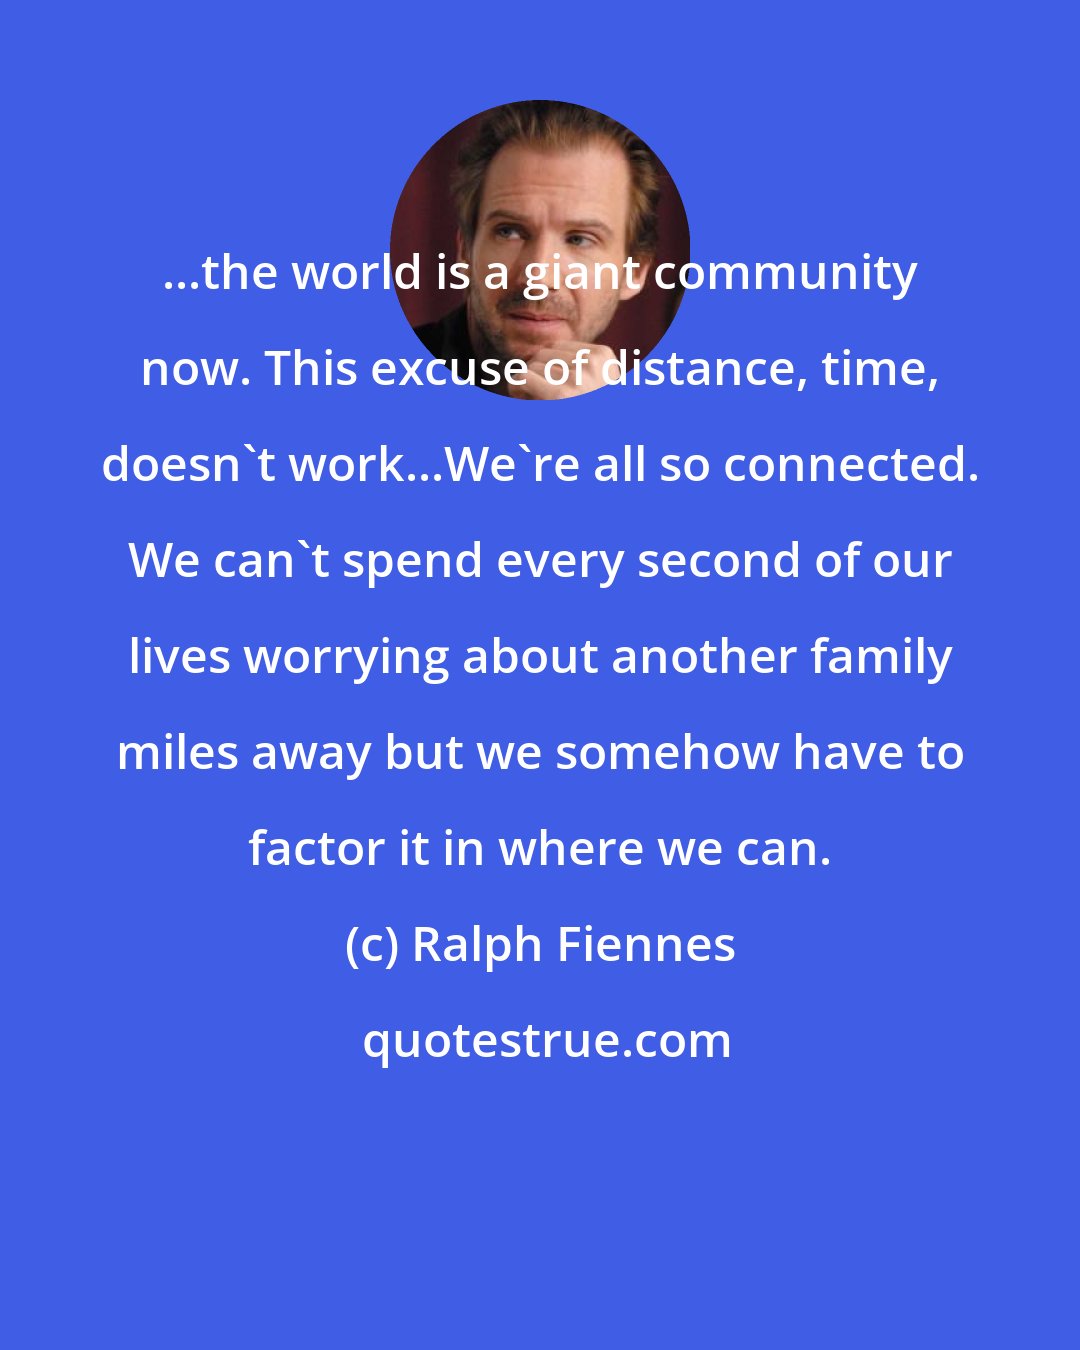 Ralph Fiennes: ...the world is a giant community now. This excuse of distance, time, doesn't work...We're all so connected. We can't spend every second of our lives worrying about another family miles away but we somehow have to factor it in where we can.